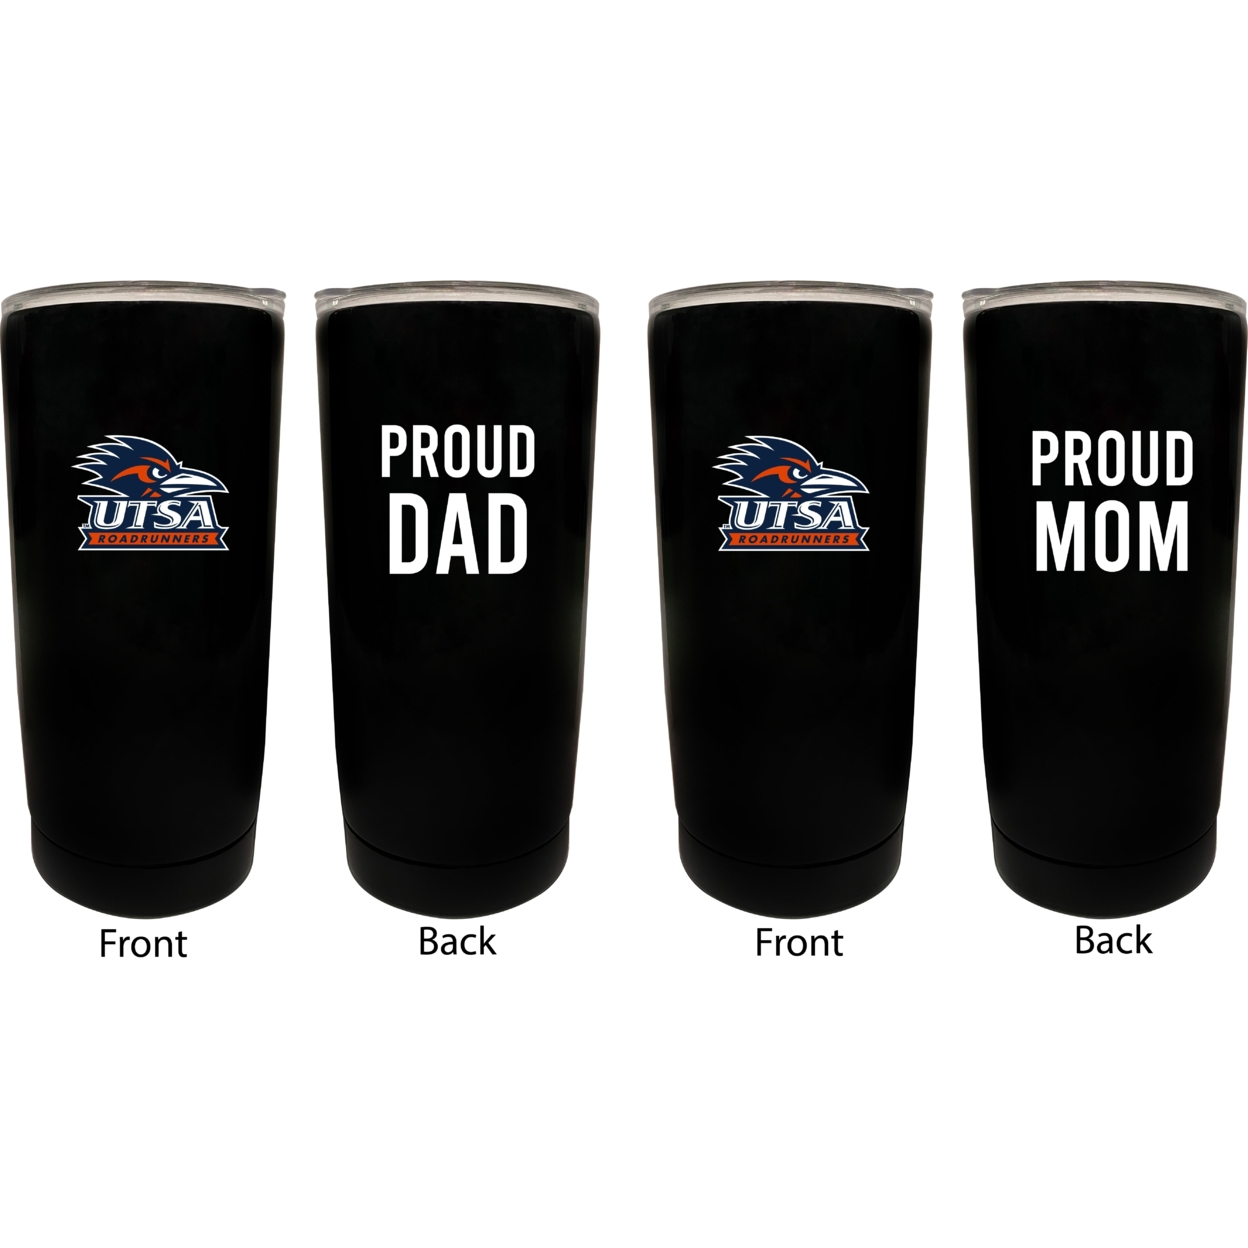 UTSA Road Runners Proud Mom And Dad 16 Oz Insulated Stainless Steel Tumblers 2 Pack Black.